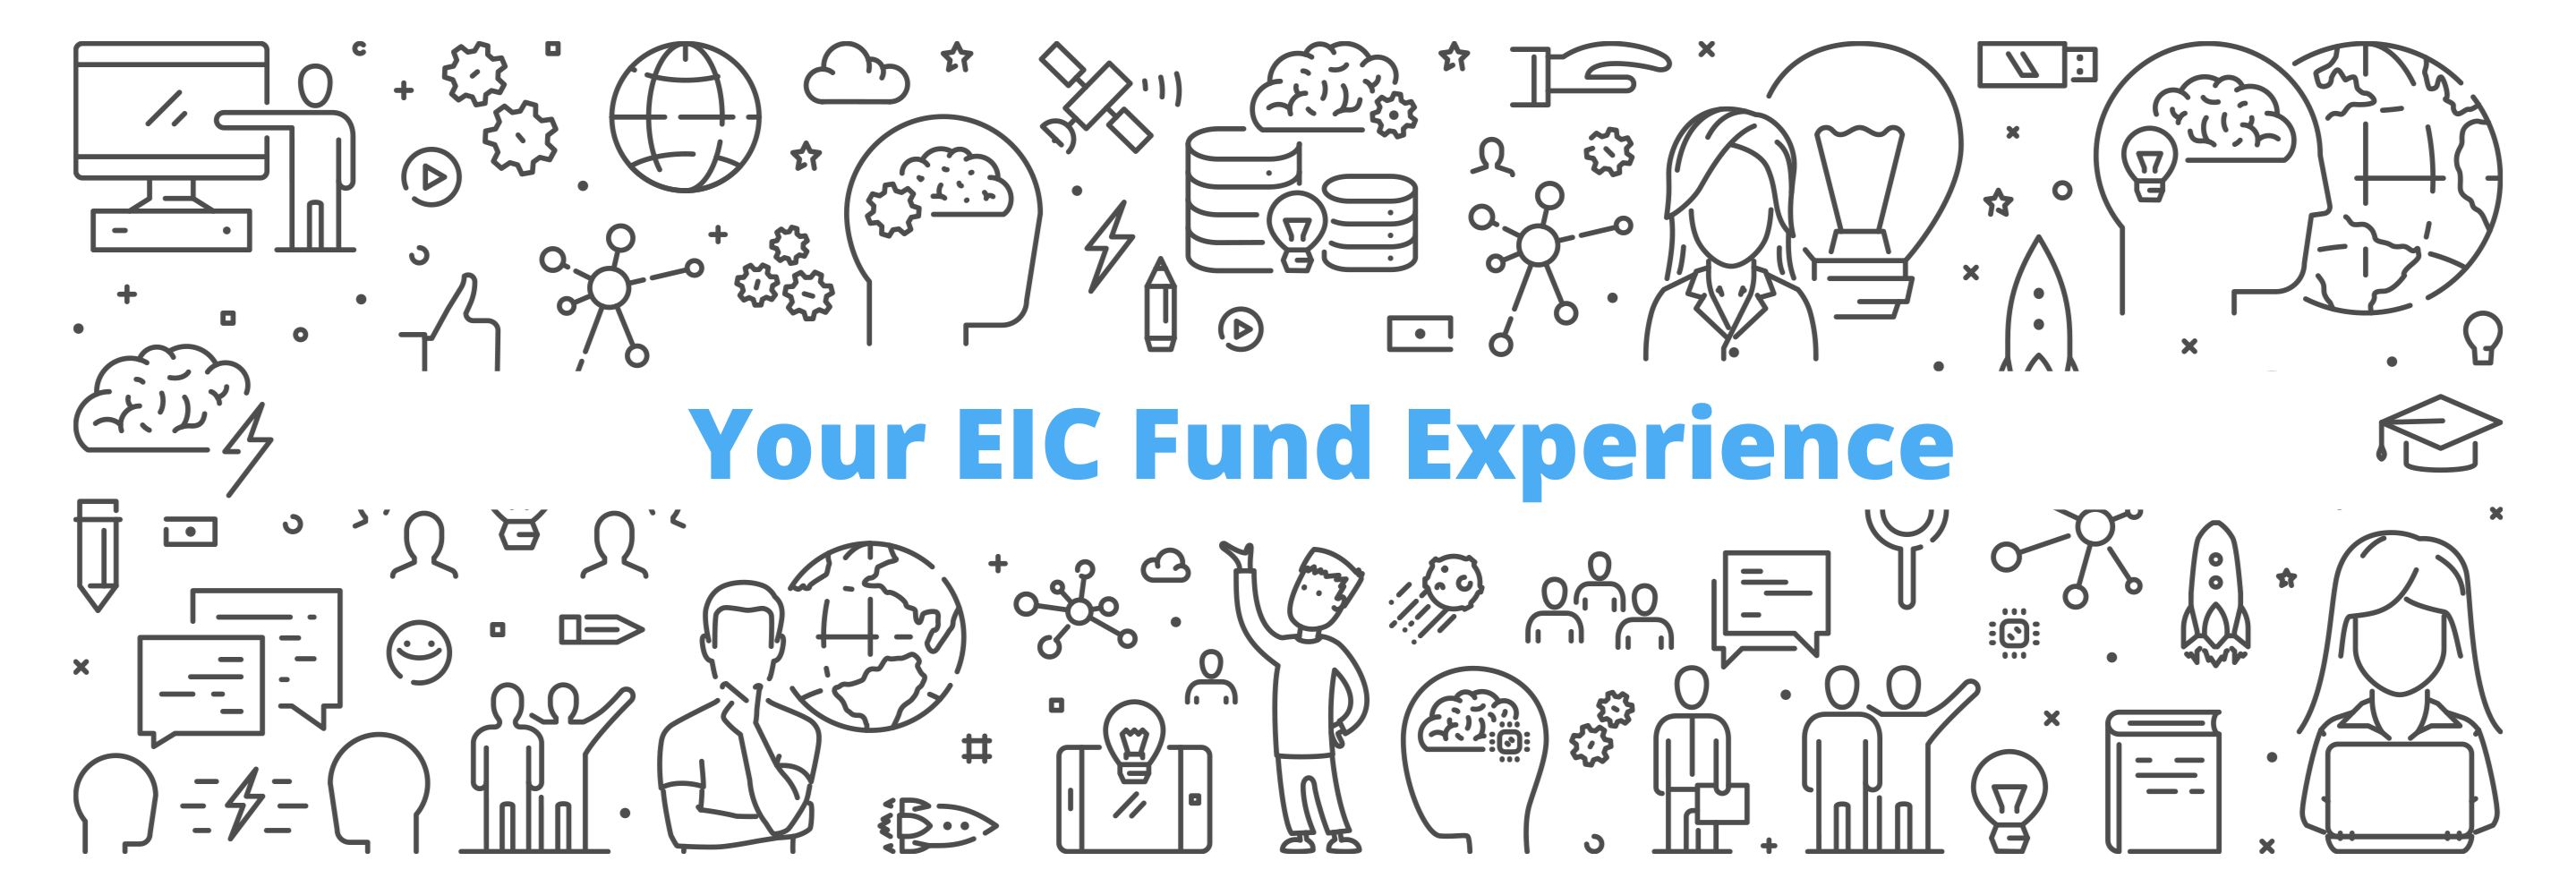 Your Experience with the EIC Fund (2)